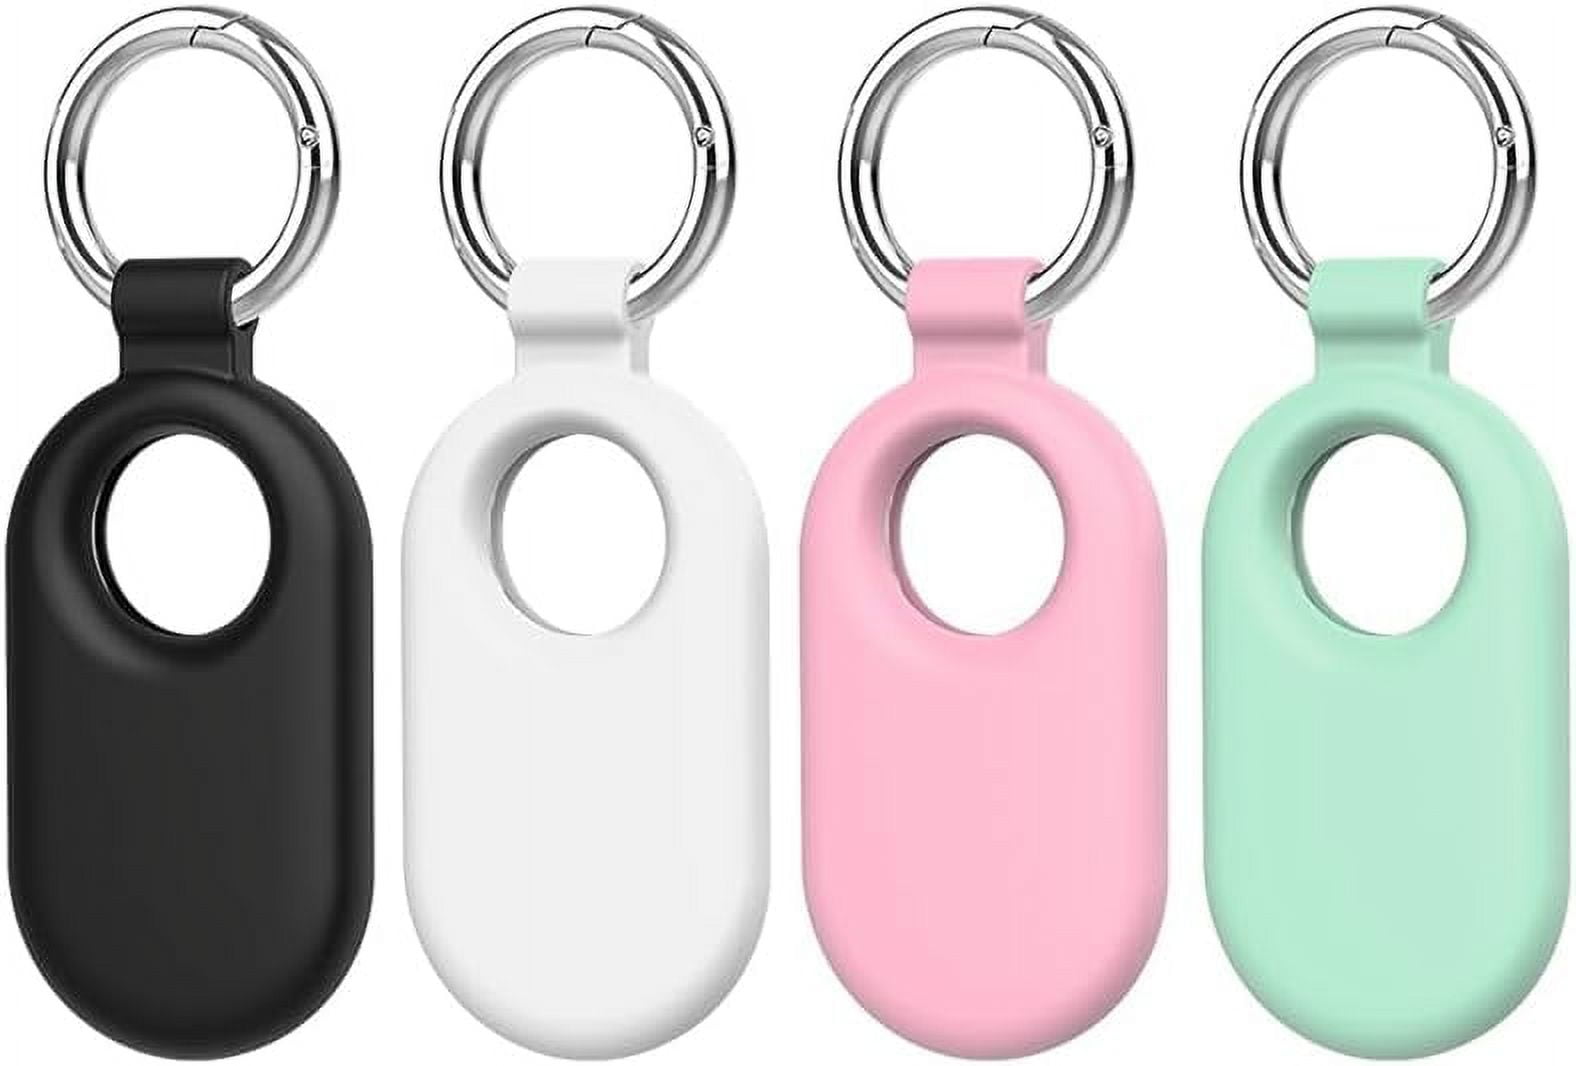 Ring Smart Galaxy Silicone Frusde Key with Protective Case Tag Samsung SmartTag2 4pcs Galaxy 2 Case, for for for Keys